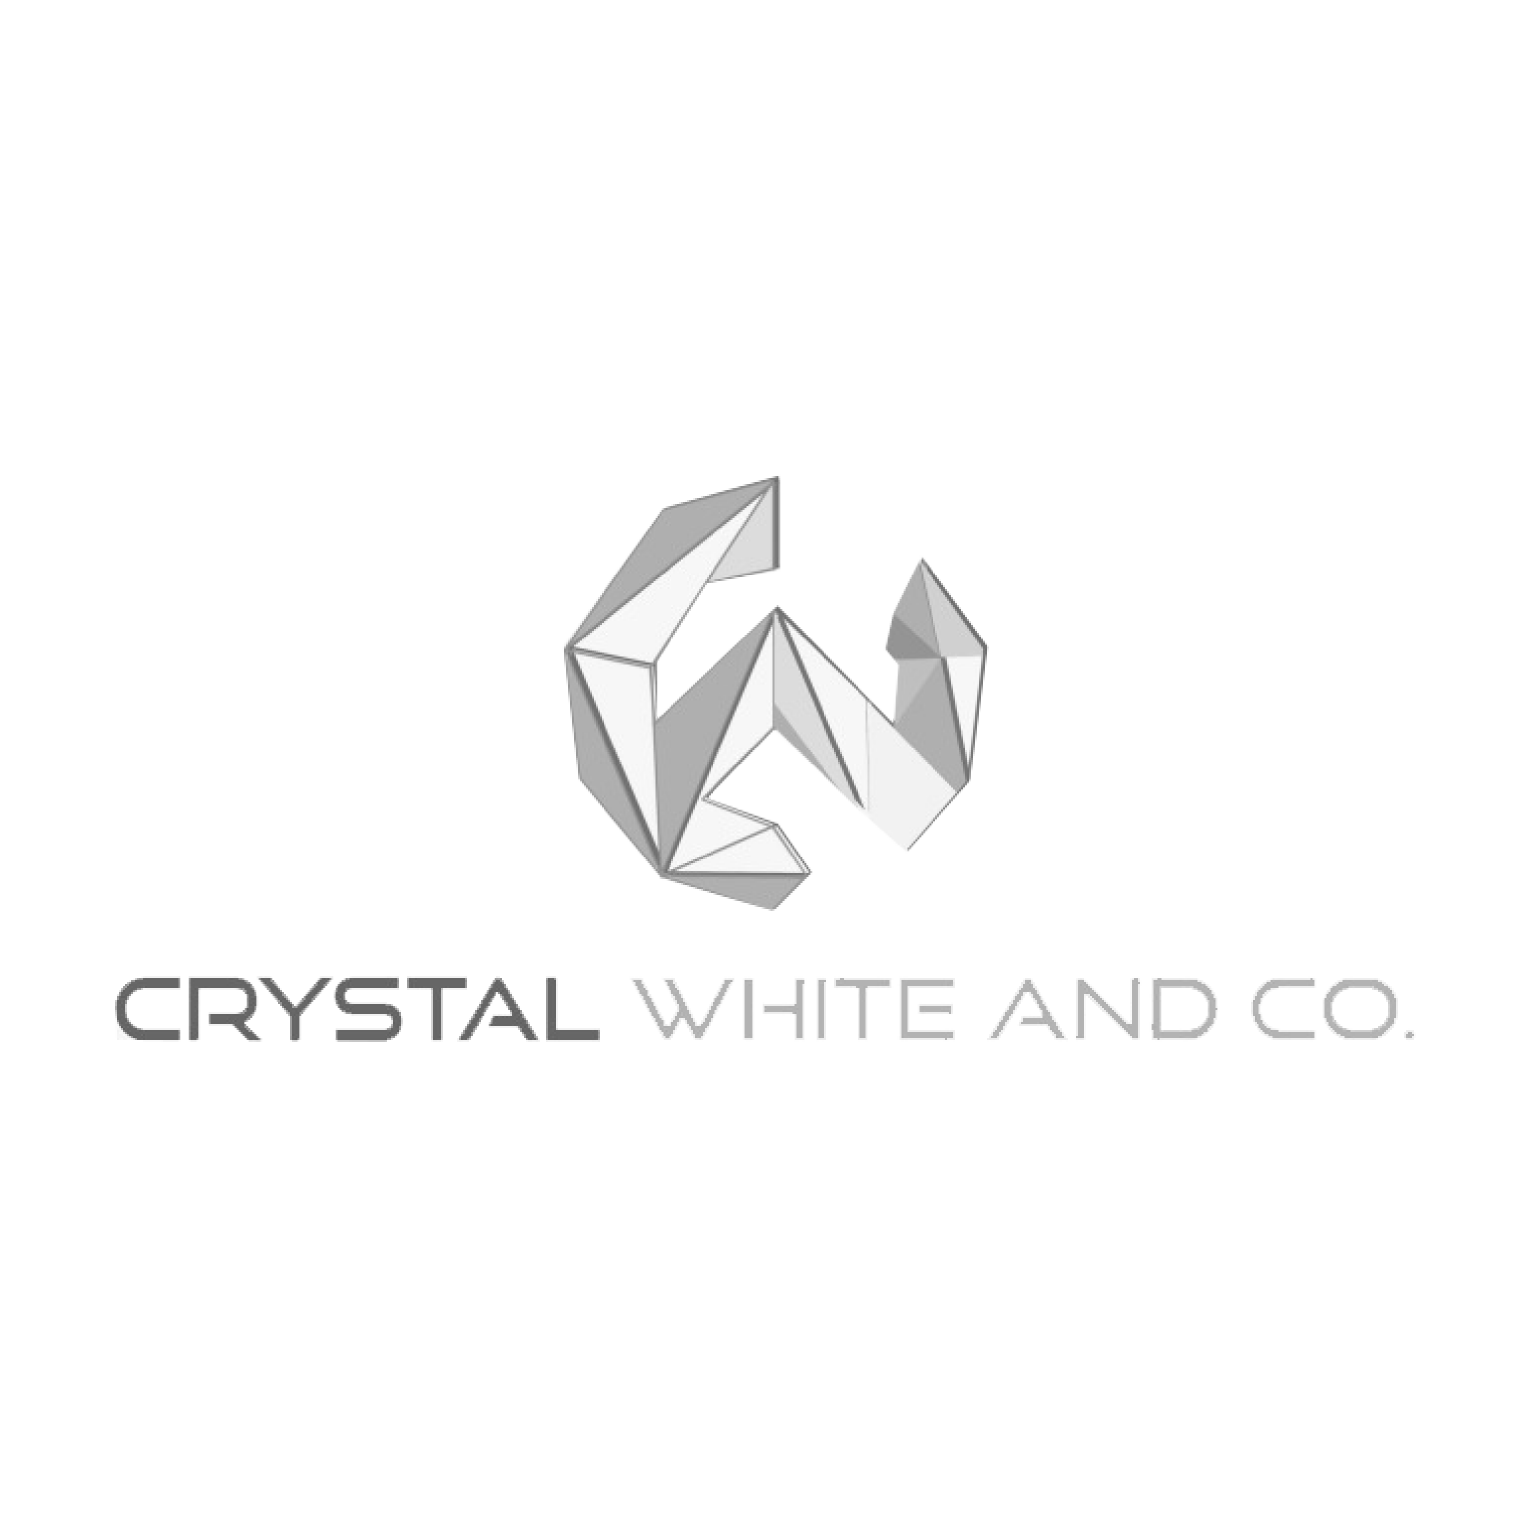 Crystal White and Co. Group of Companies Limited